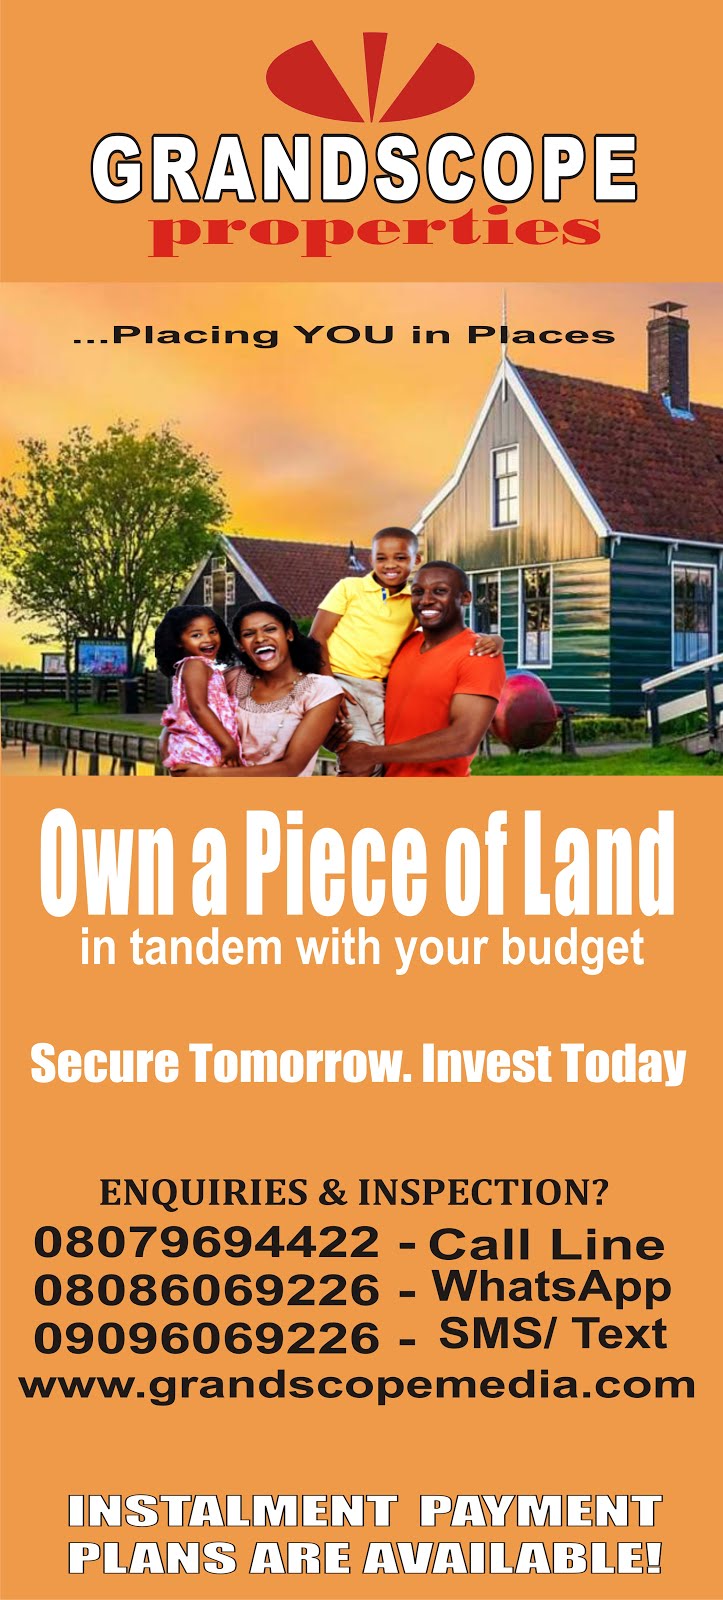 BECOME A LAND OWNER!